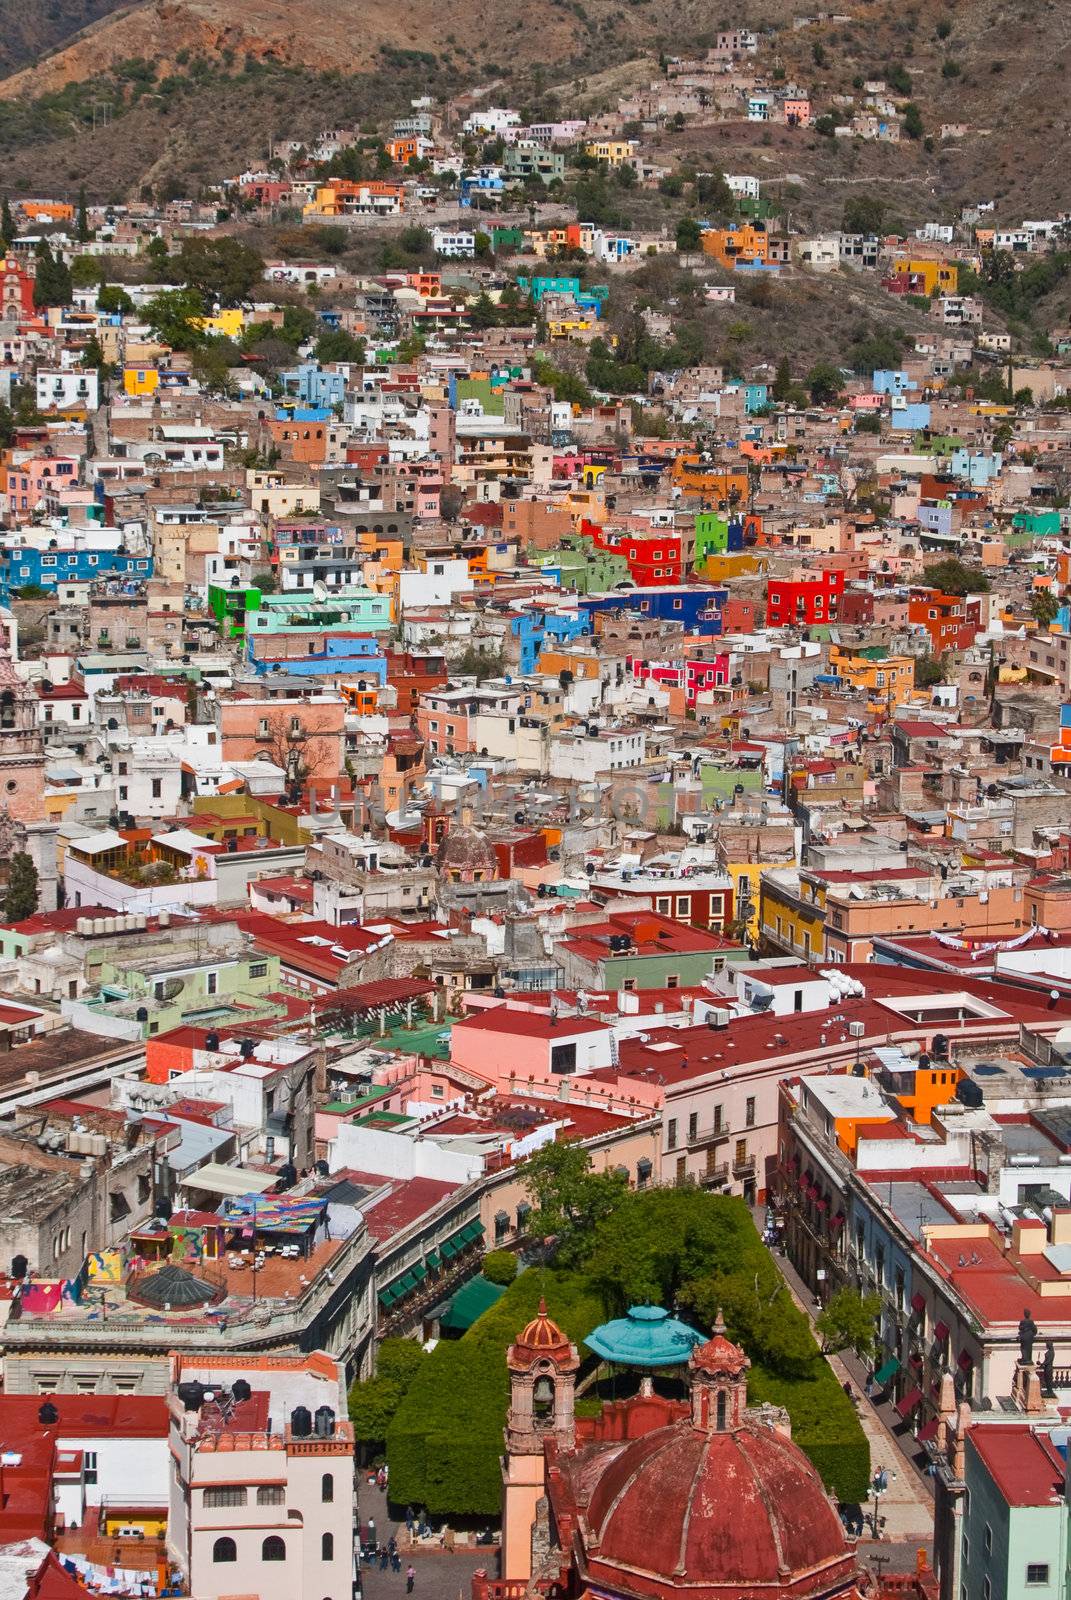 Colorful houses on hillside in Guanajuato Mexico